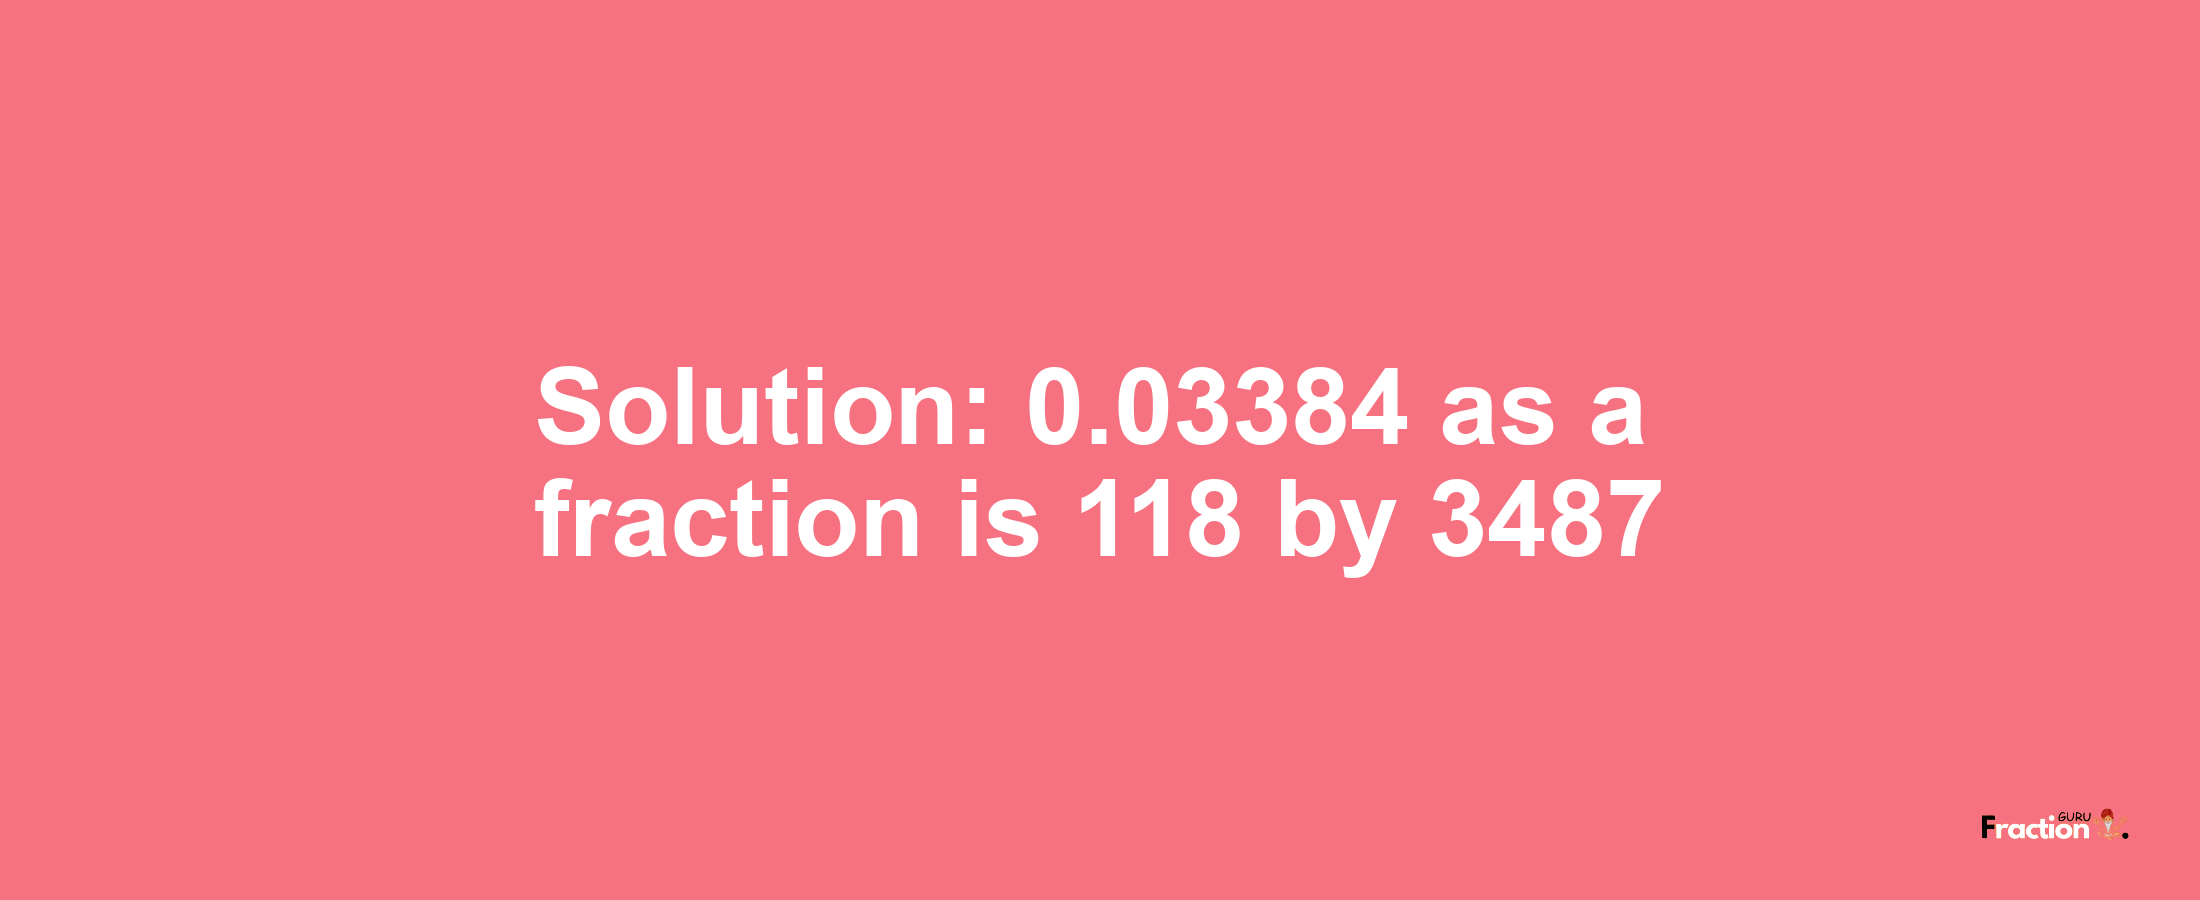 Solution:0.03384 as a fraction is 118/3487